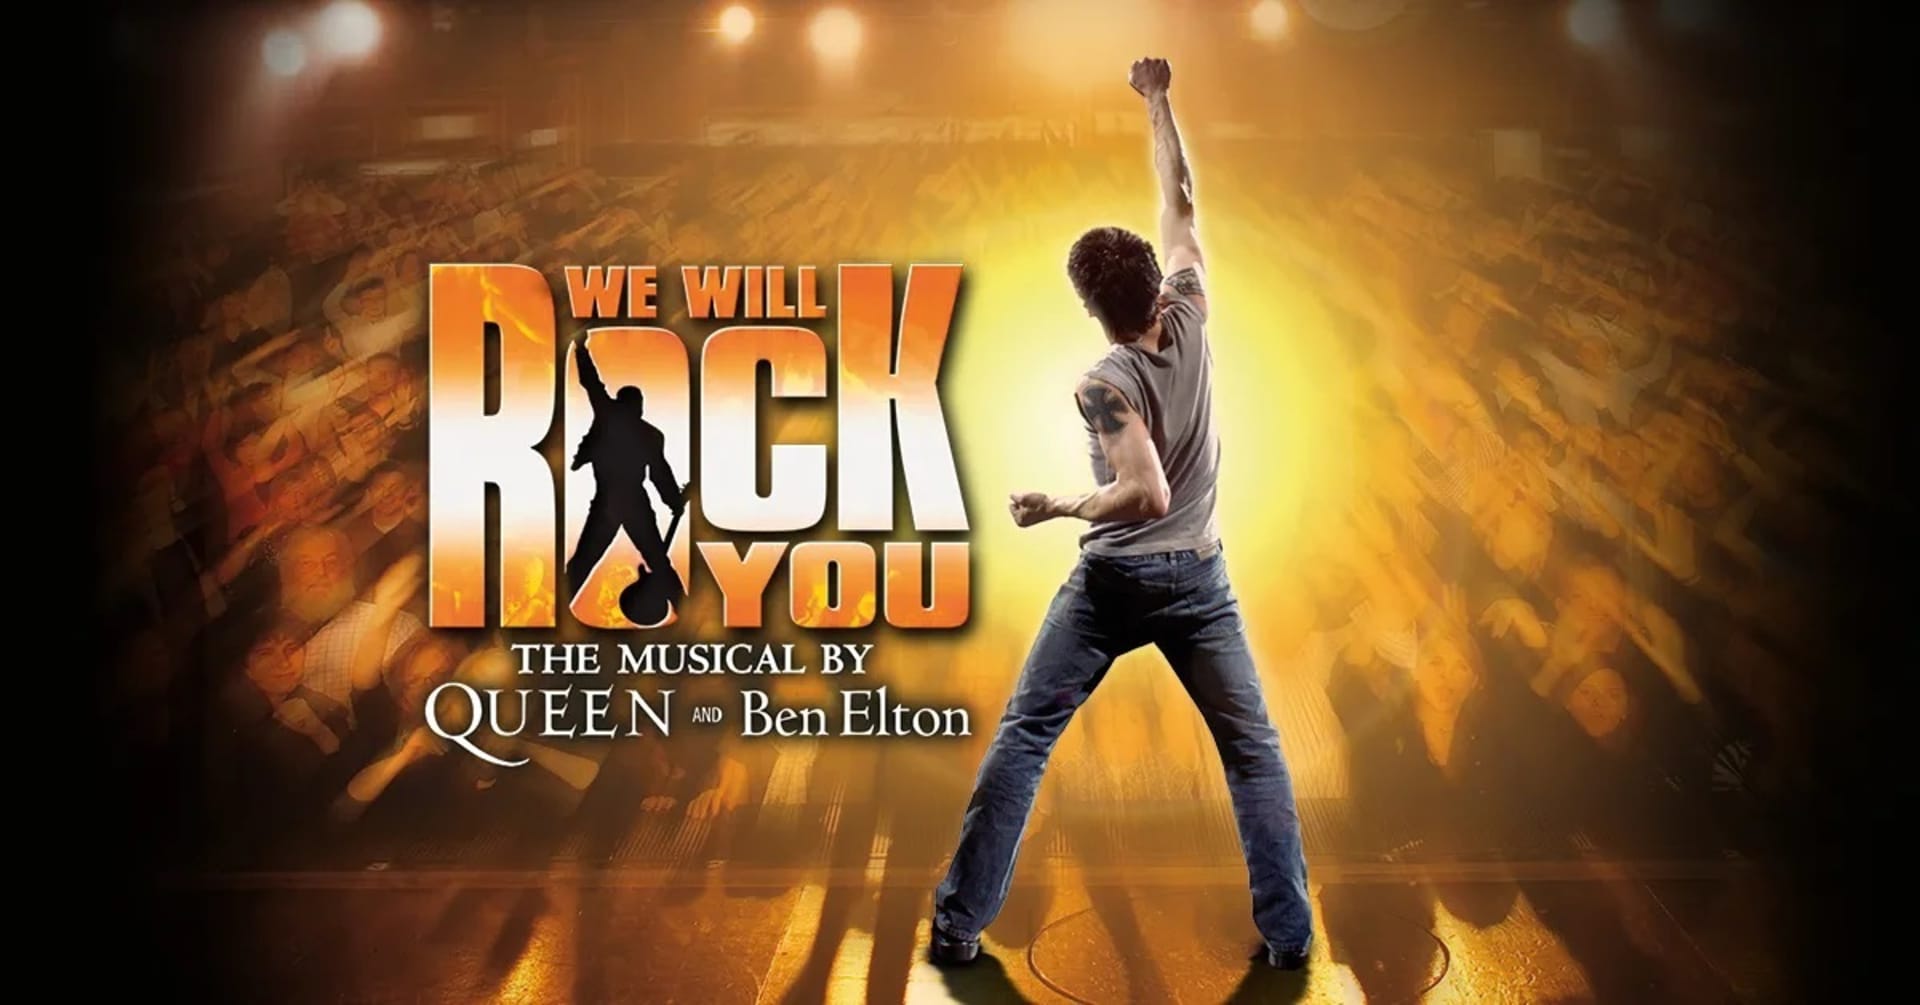 we will rock you tour 2022 uk cast